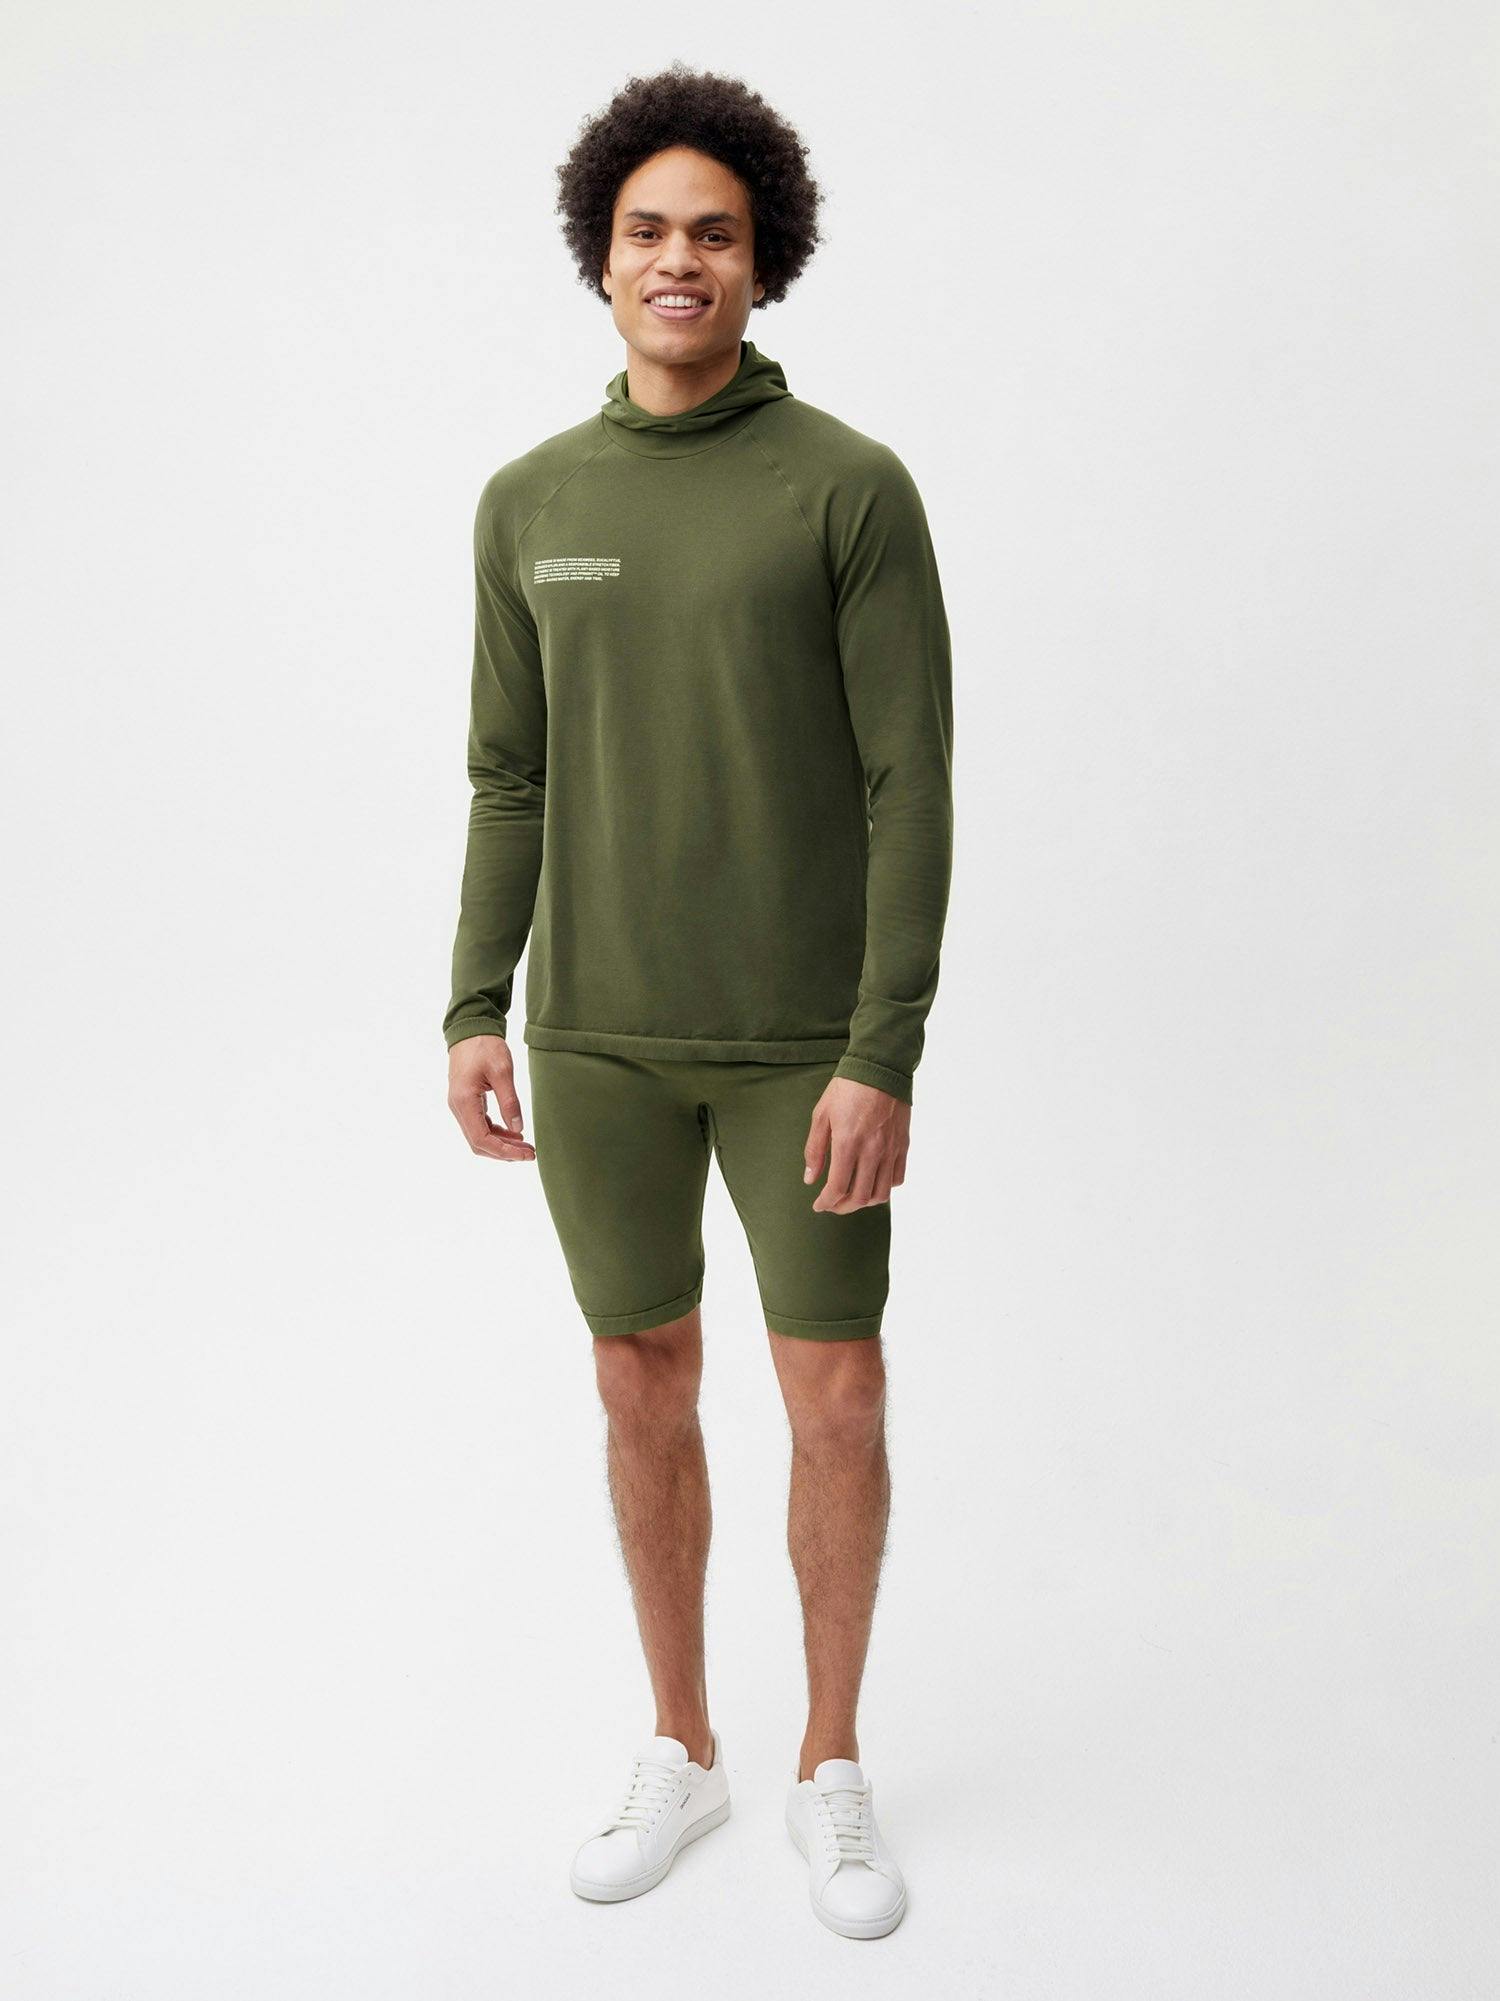 https://cdn.shopify.com/s/files/1/0035/1309/0115/products/Activewear-Mens-Hoodie-Rosemary-Green-1.jpg?v=1662475878